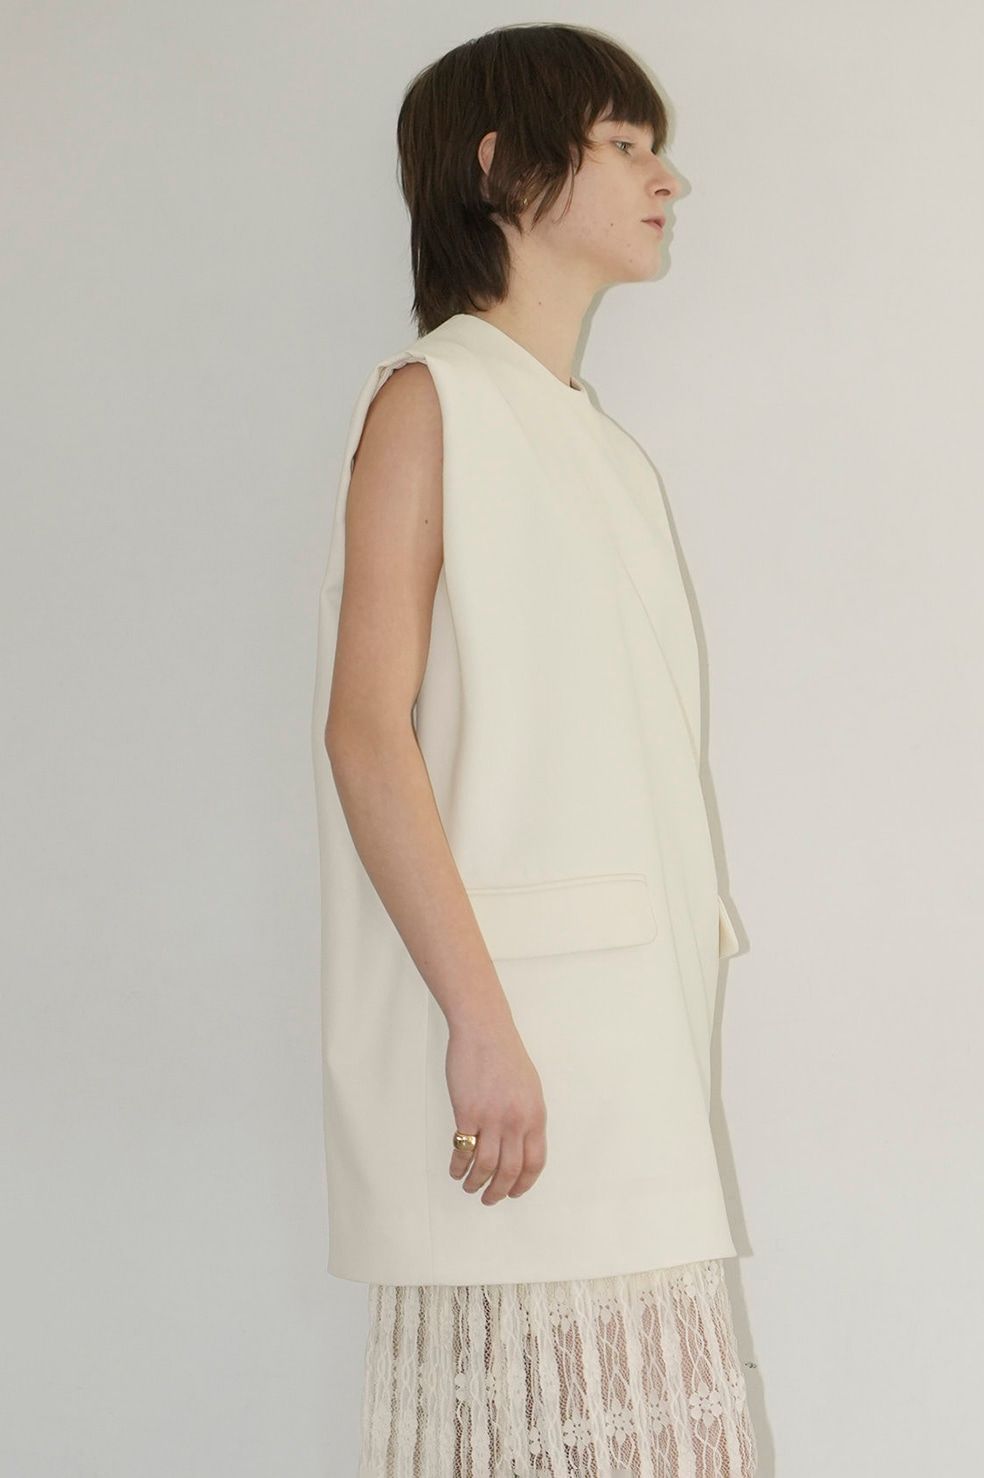 CLANE - ノースリーブ ロングトップス - SLEEVELESS LONG COCOON TOPS ...